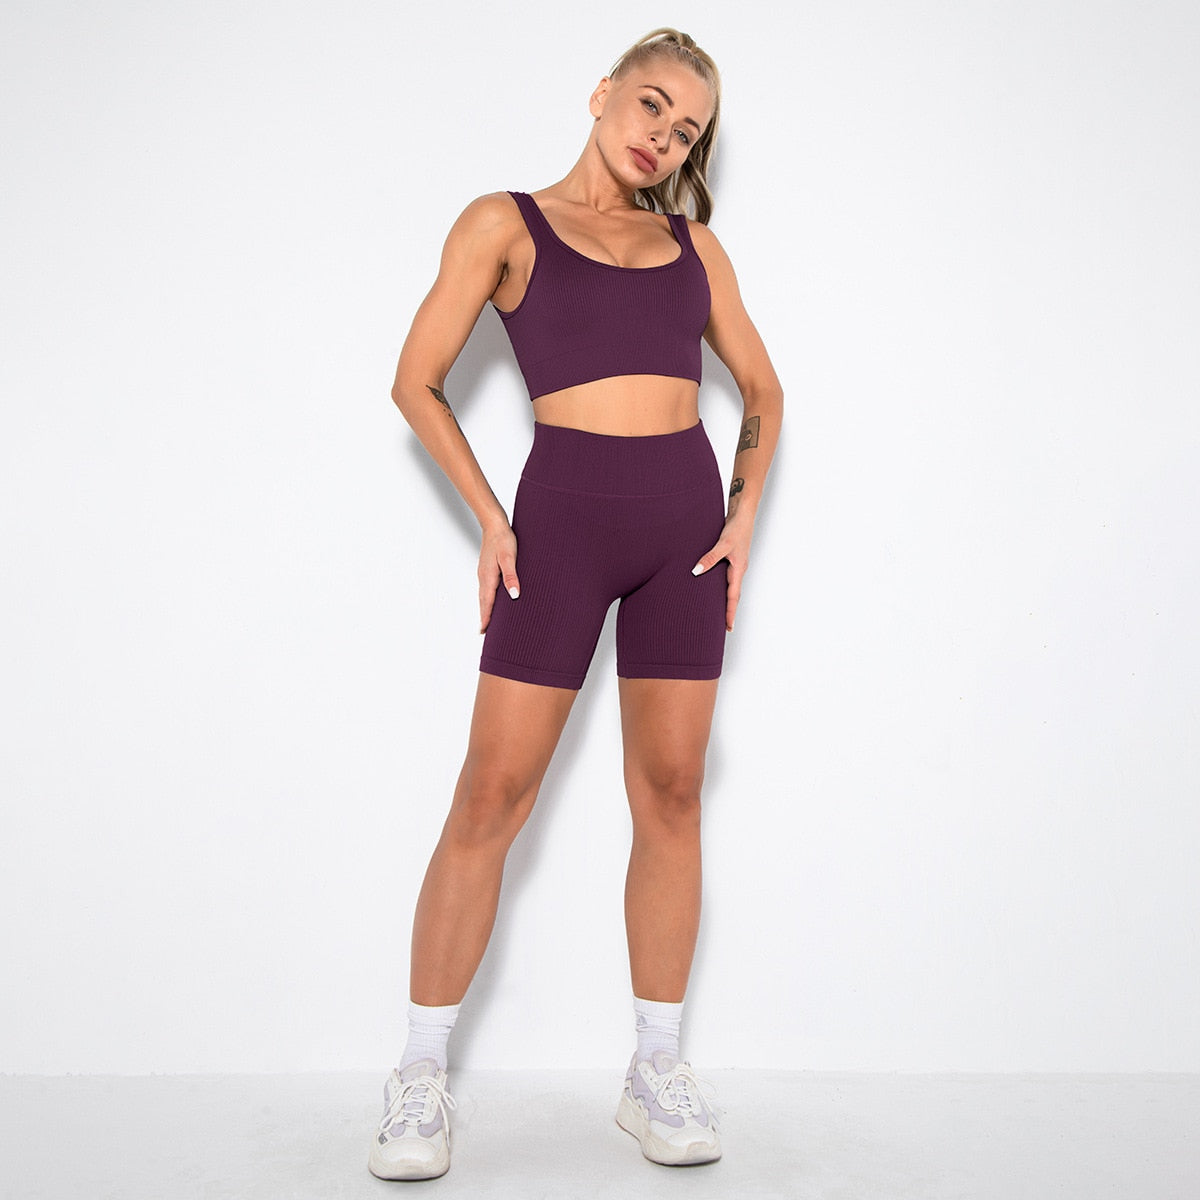 2 Piece Gym Set Women Seamless Leggings Sports Bra Workout Shorts Set Fitness Crop Top Running Outfit Suit Tracksuit Clothing